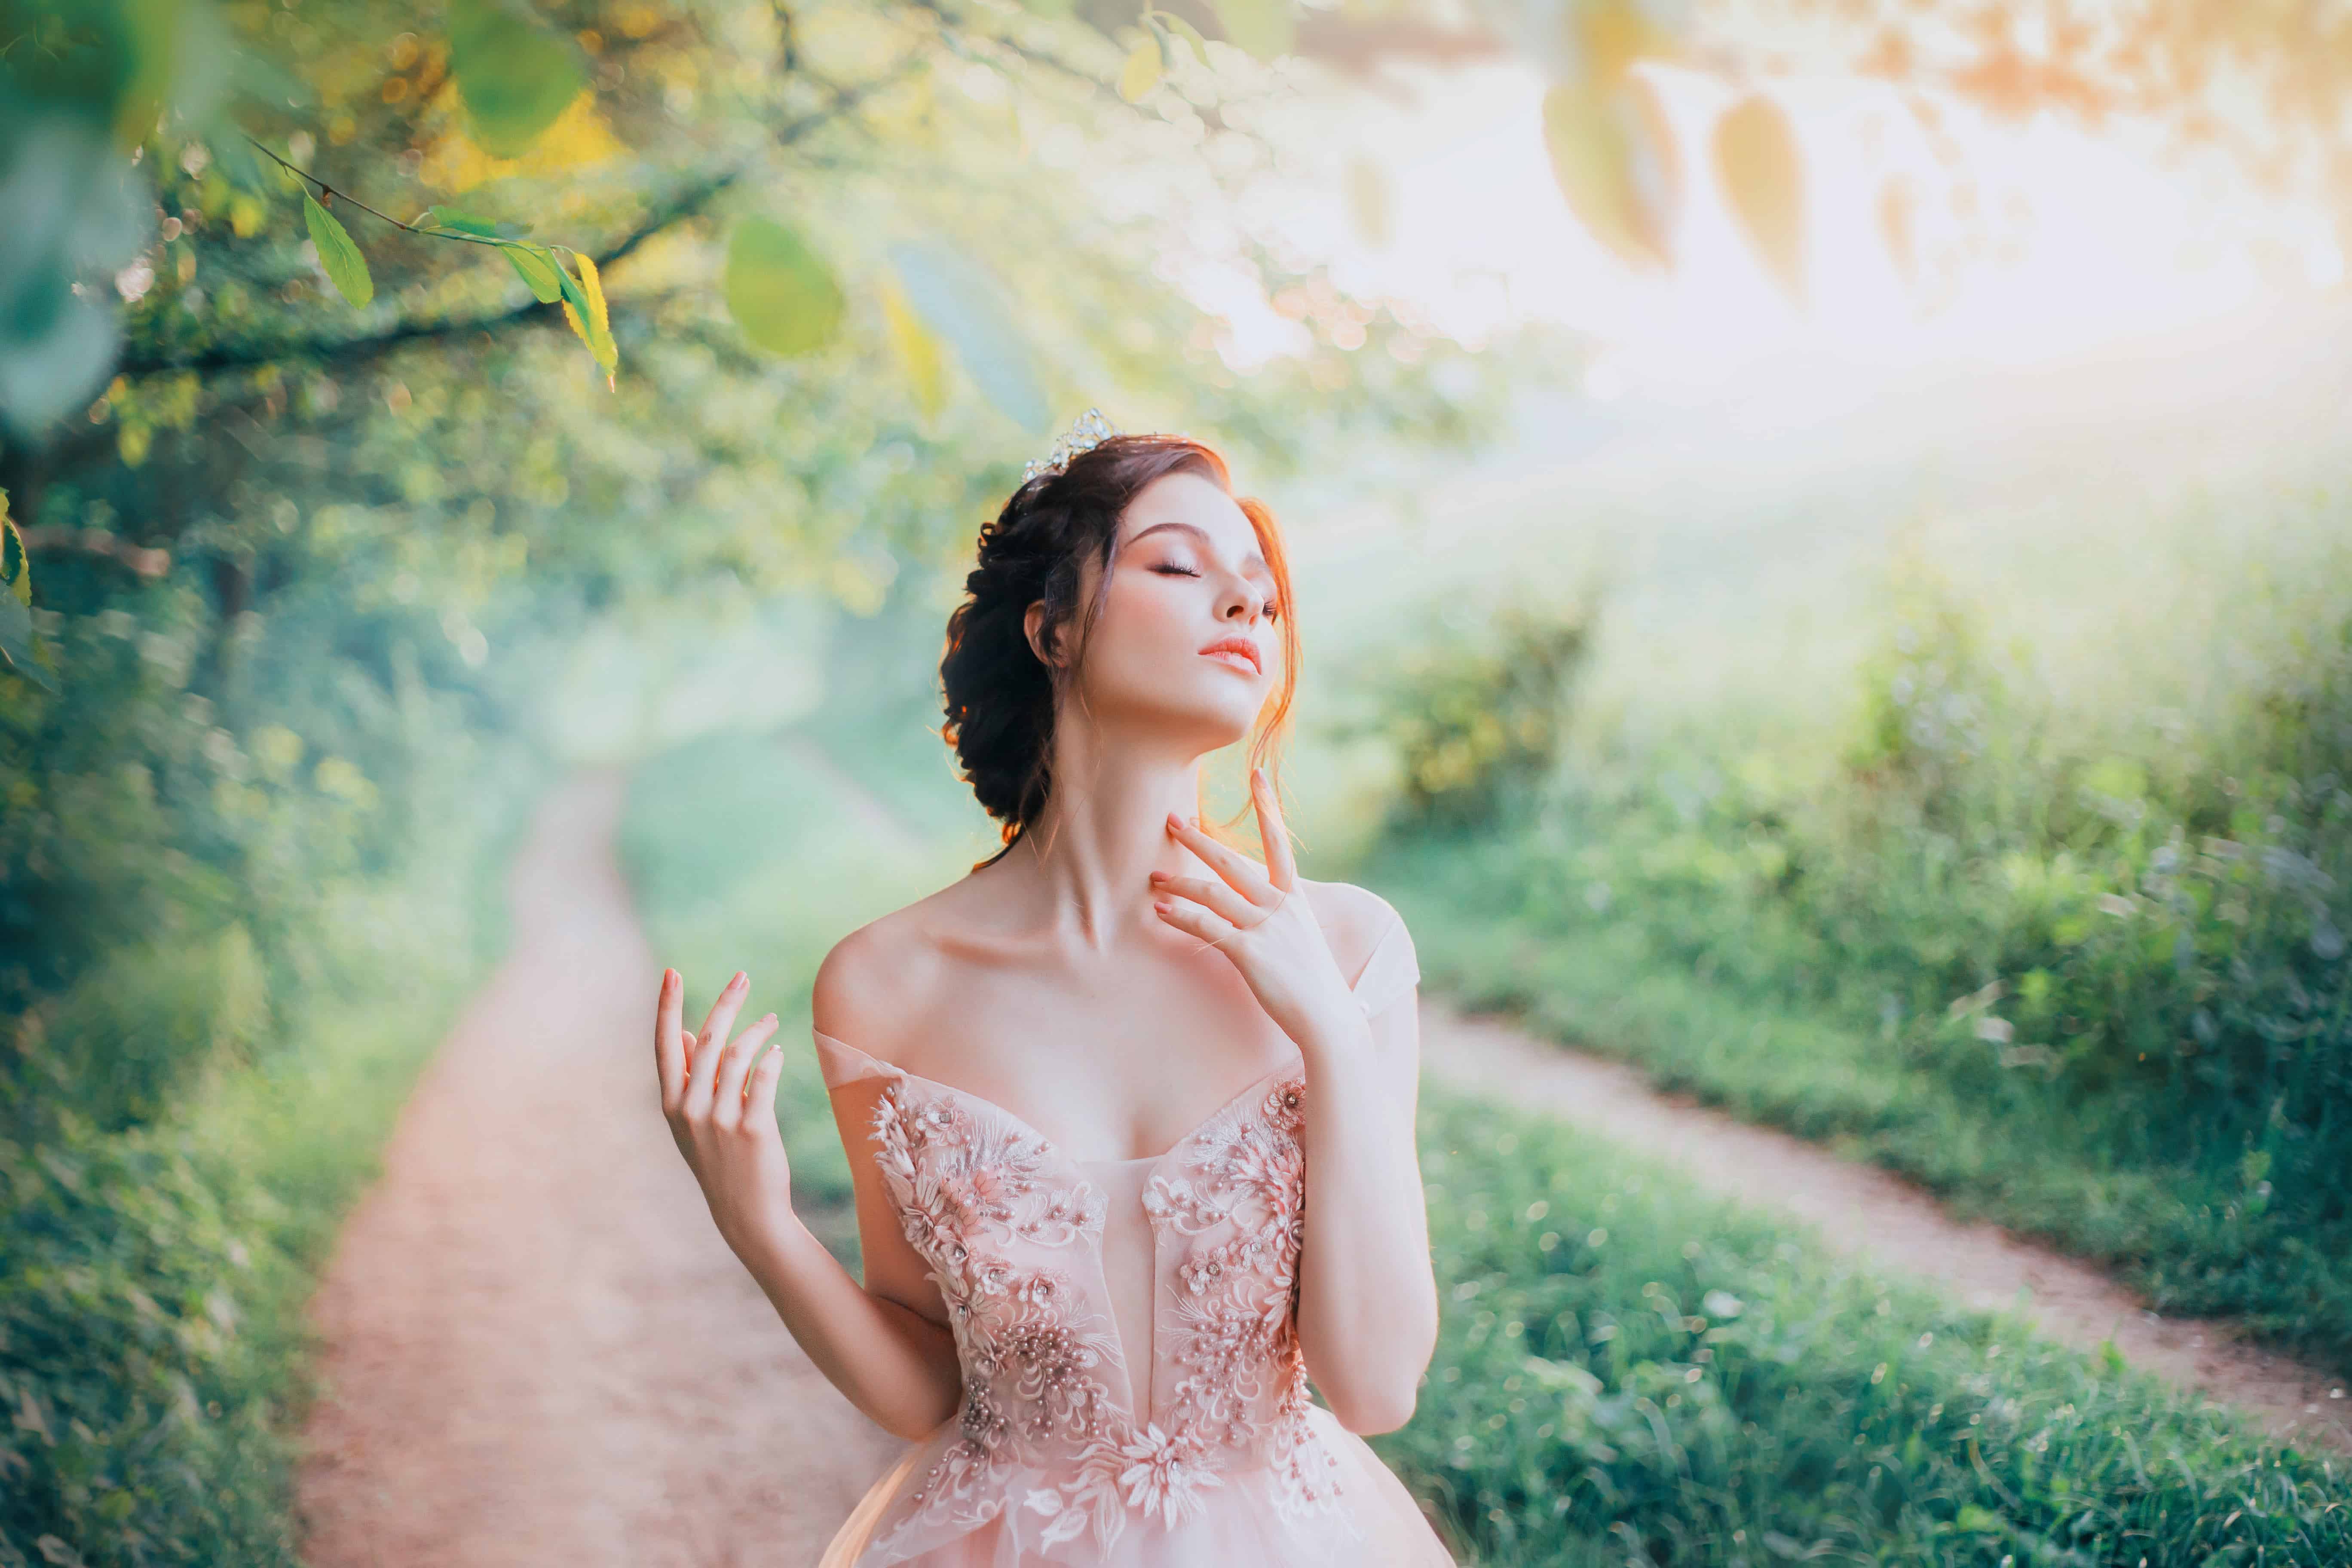 charming goddess of the spring forest stands on a narrow path and breathes in the sweet smell of nature, pleasure in motion, lady with her eyes closed strokes her beautiful neck with her fingertips